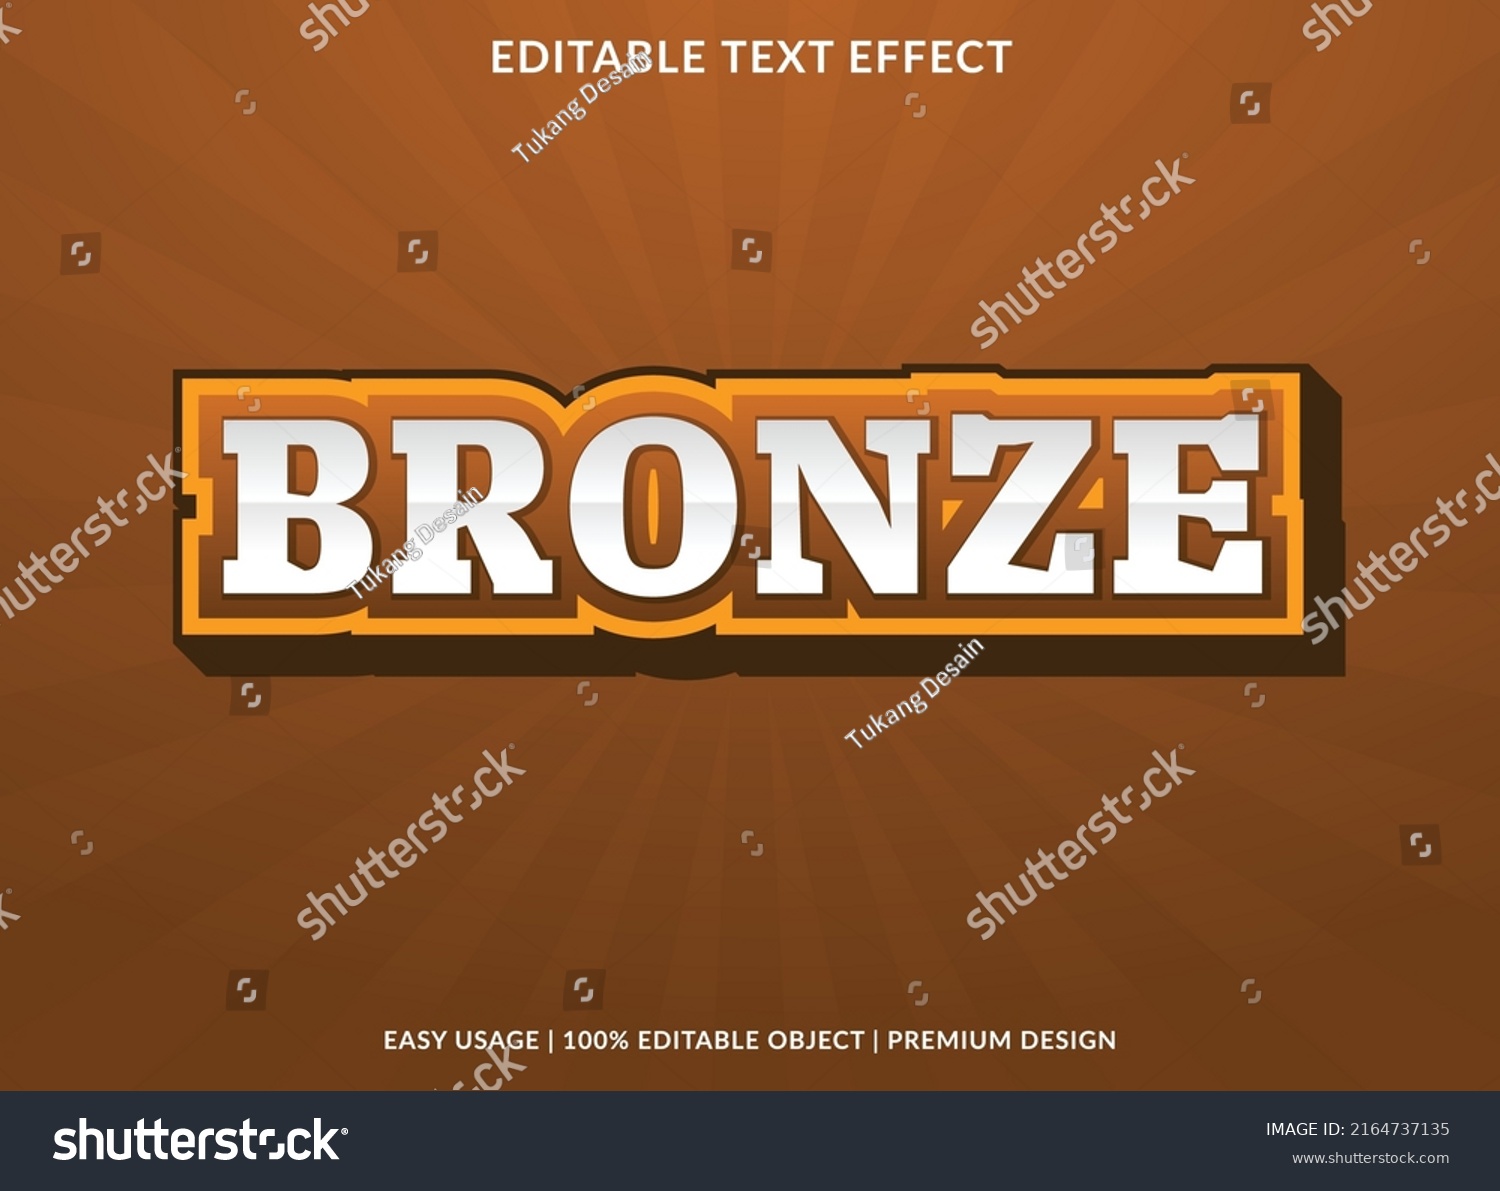 bronze editable text effect template use for business logo and brand